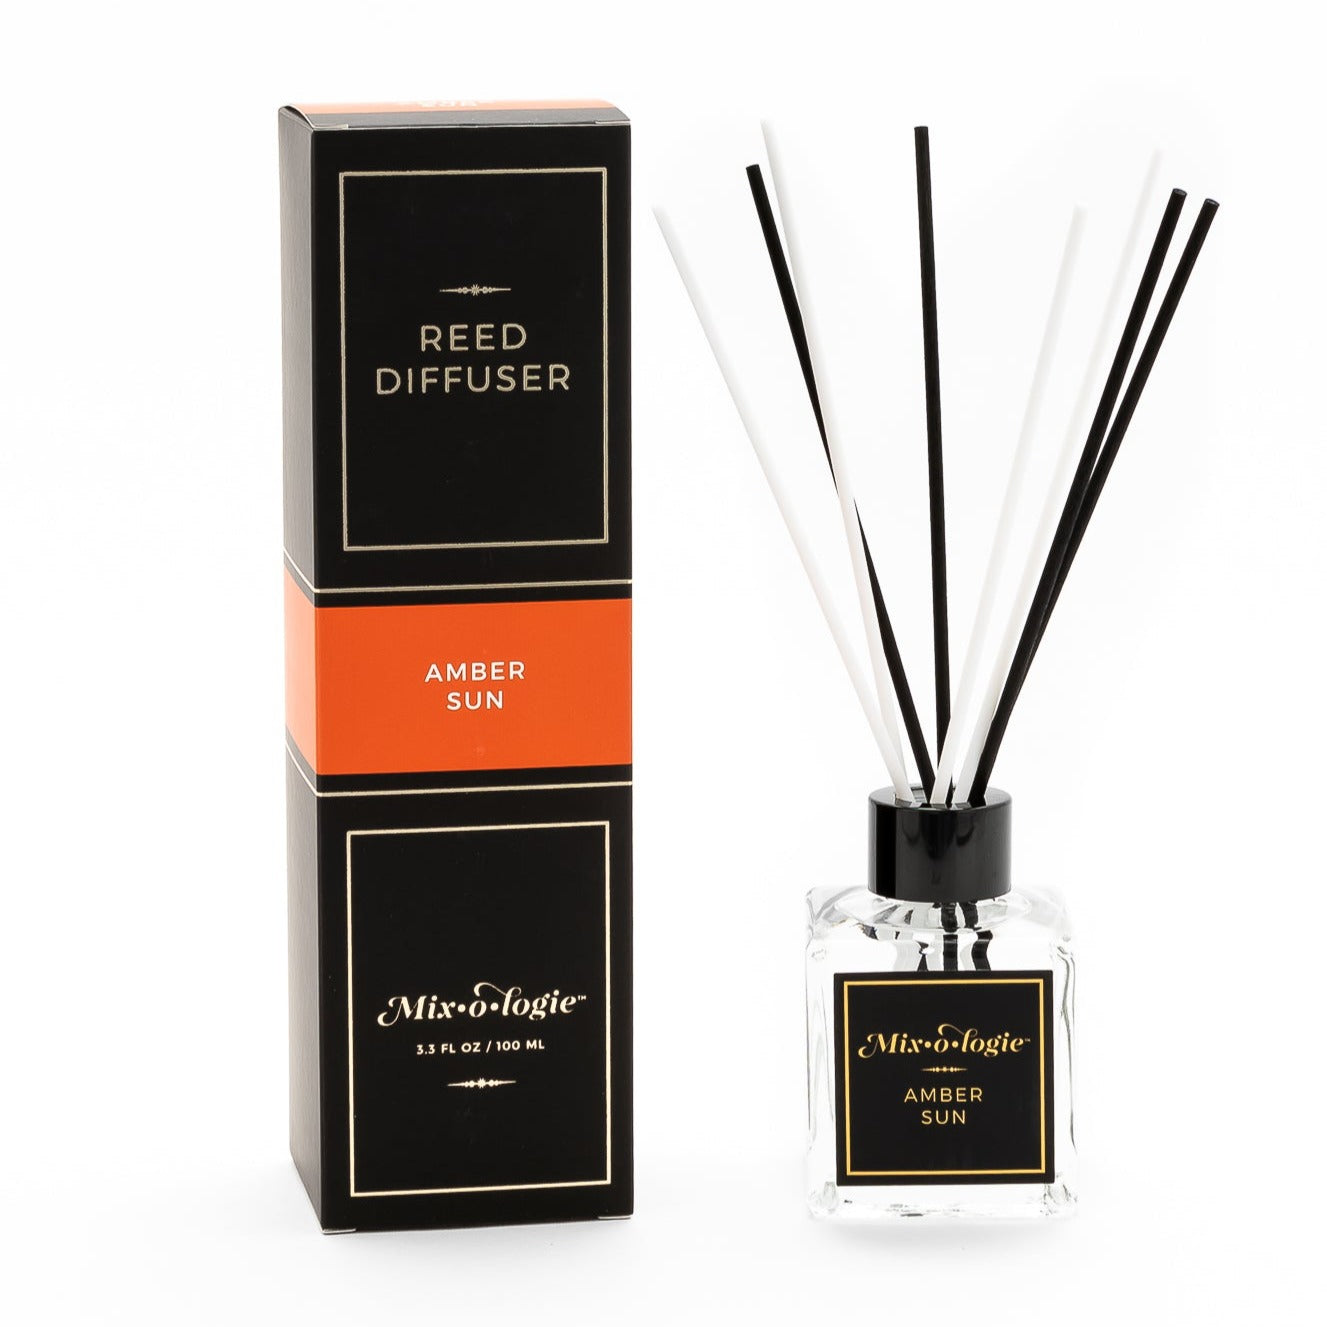 Mixologie Amber Sun scented Reed Diffuser 3.3 FL oz clear glass bottle with 8 diffuser reed sticks.